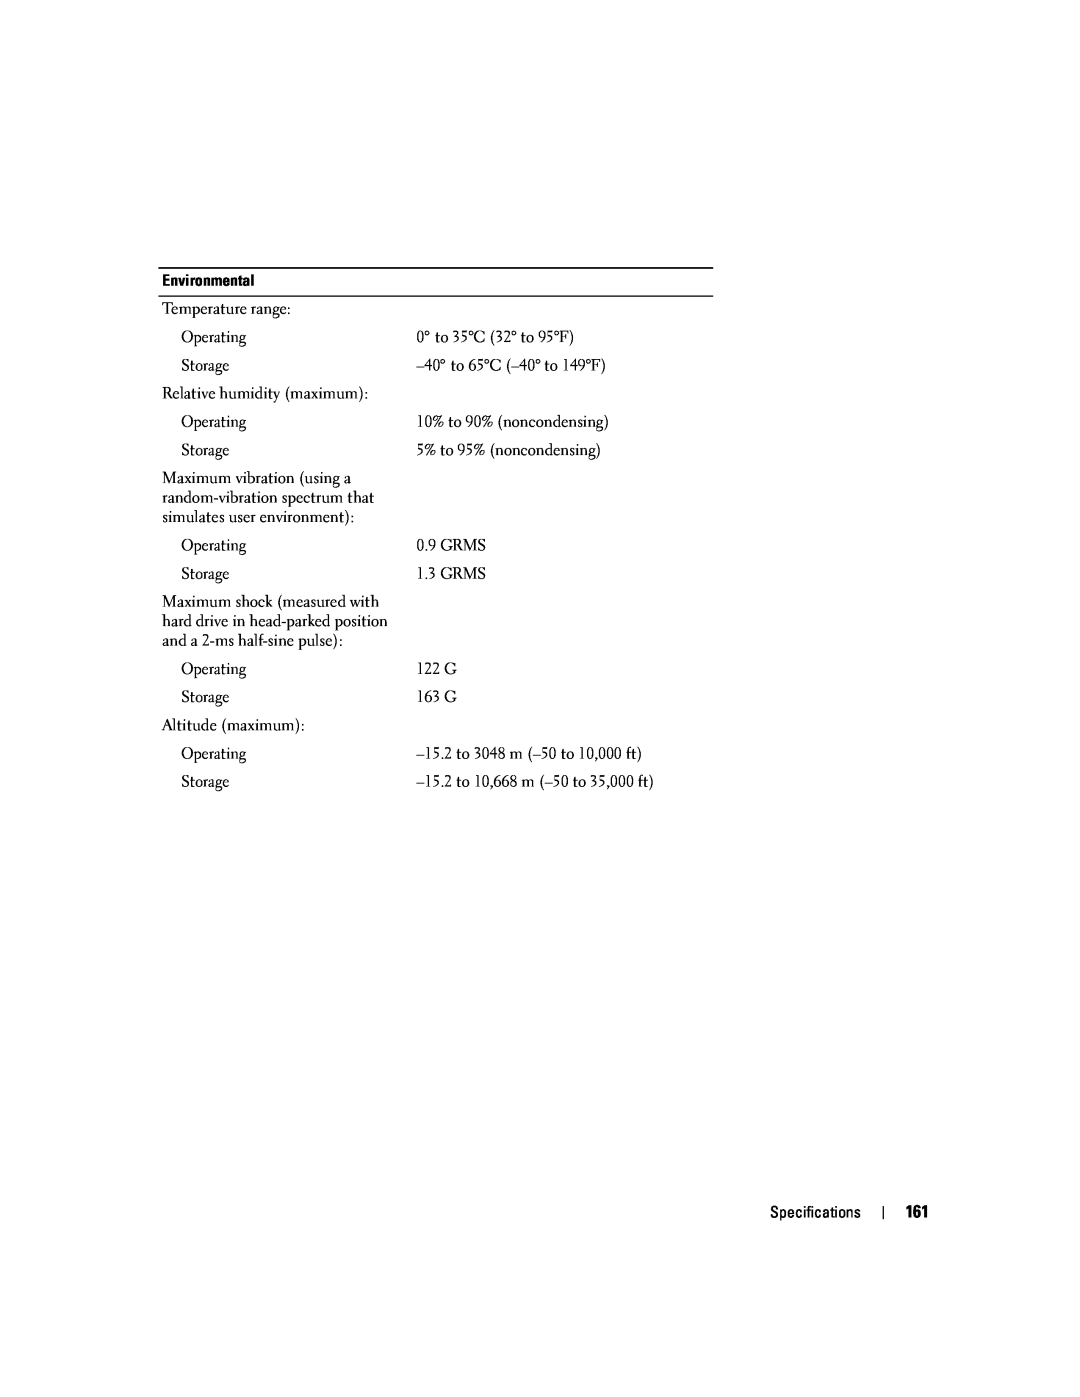 Dell PP20L owner manual Environmental, Specifications 